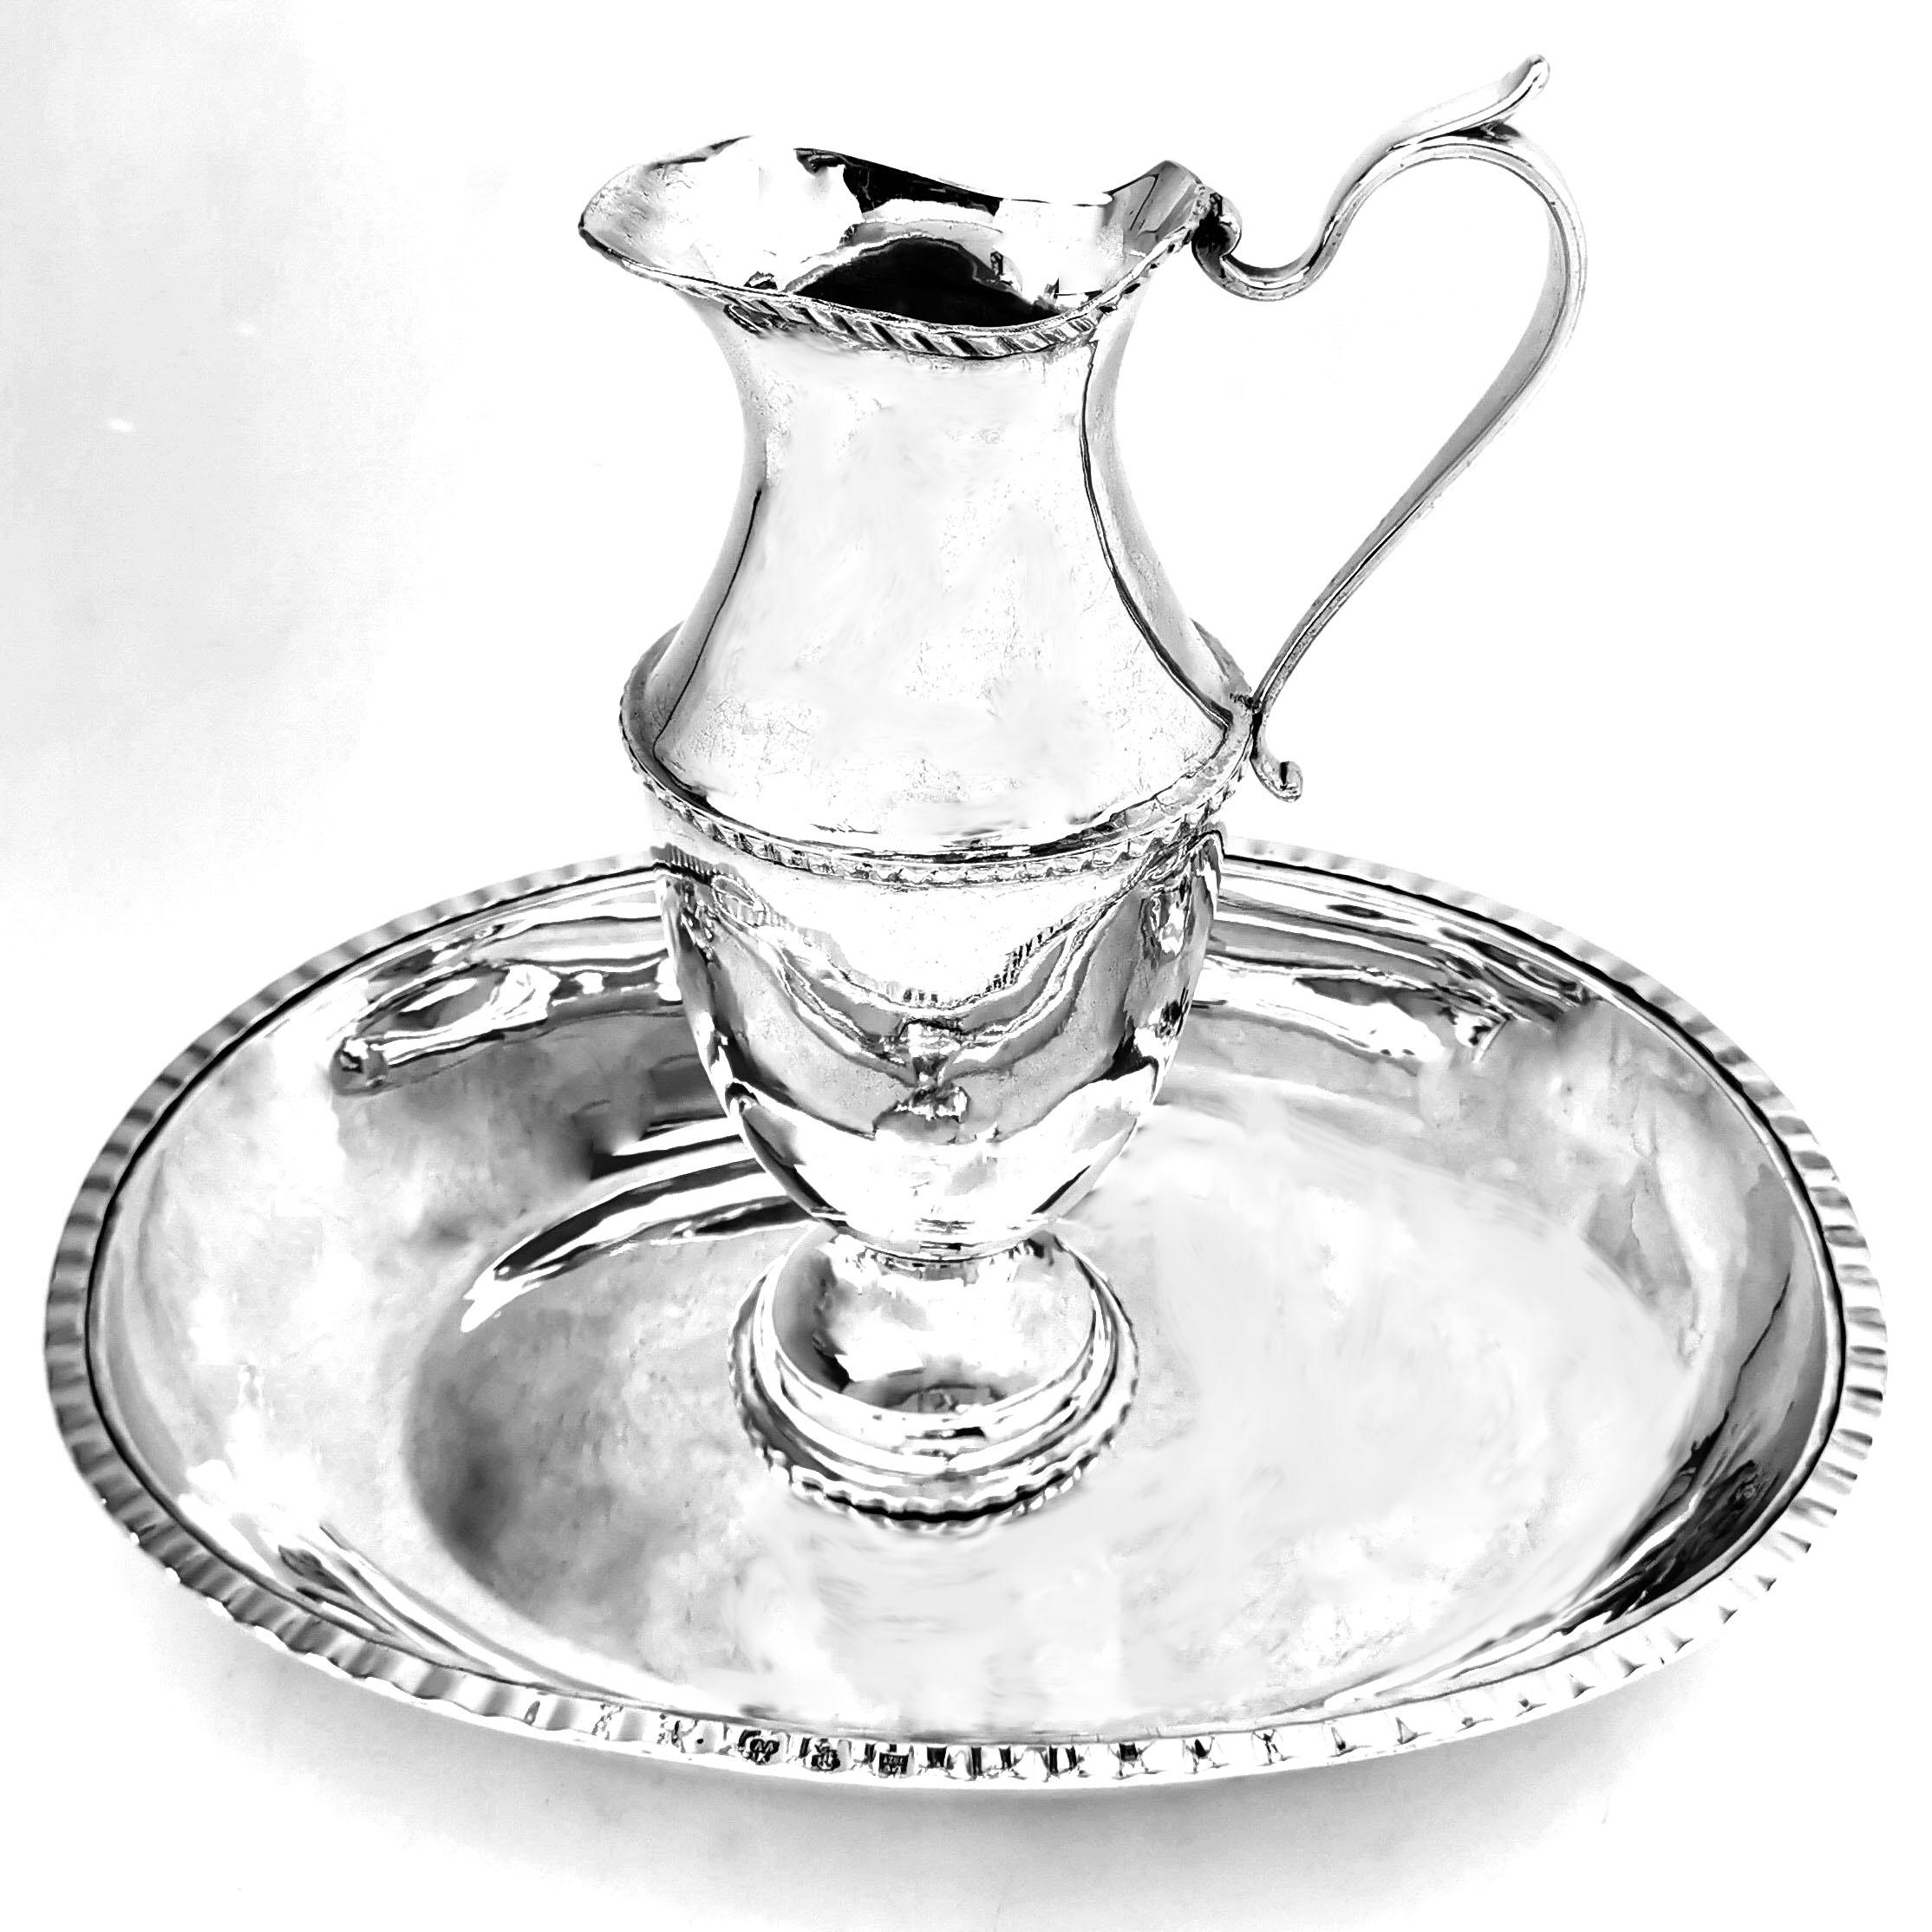 A magnificent antique Russian solid Silver Jug and Basin with an elegant polished silver finish. The bowl is a round cornered rectangle with a understated border on the rim that is mirrored on the Jug. This elegant pair could be used for serving as